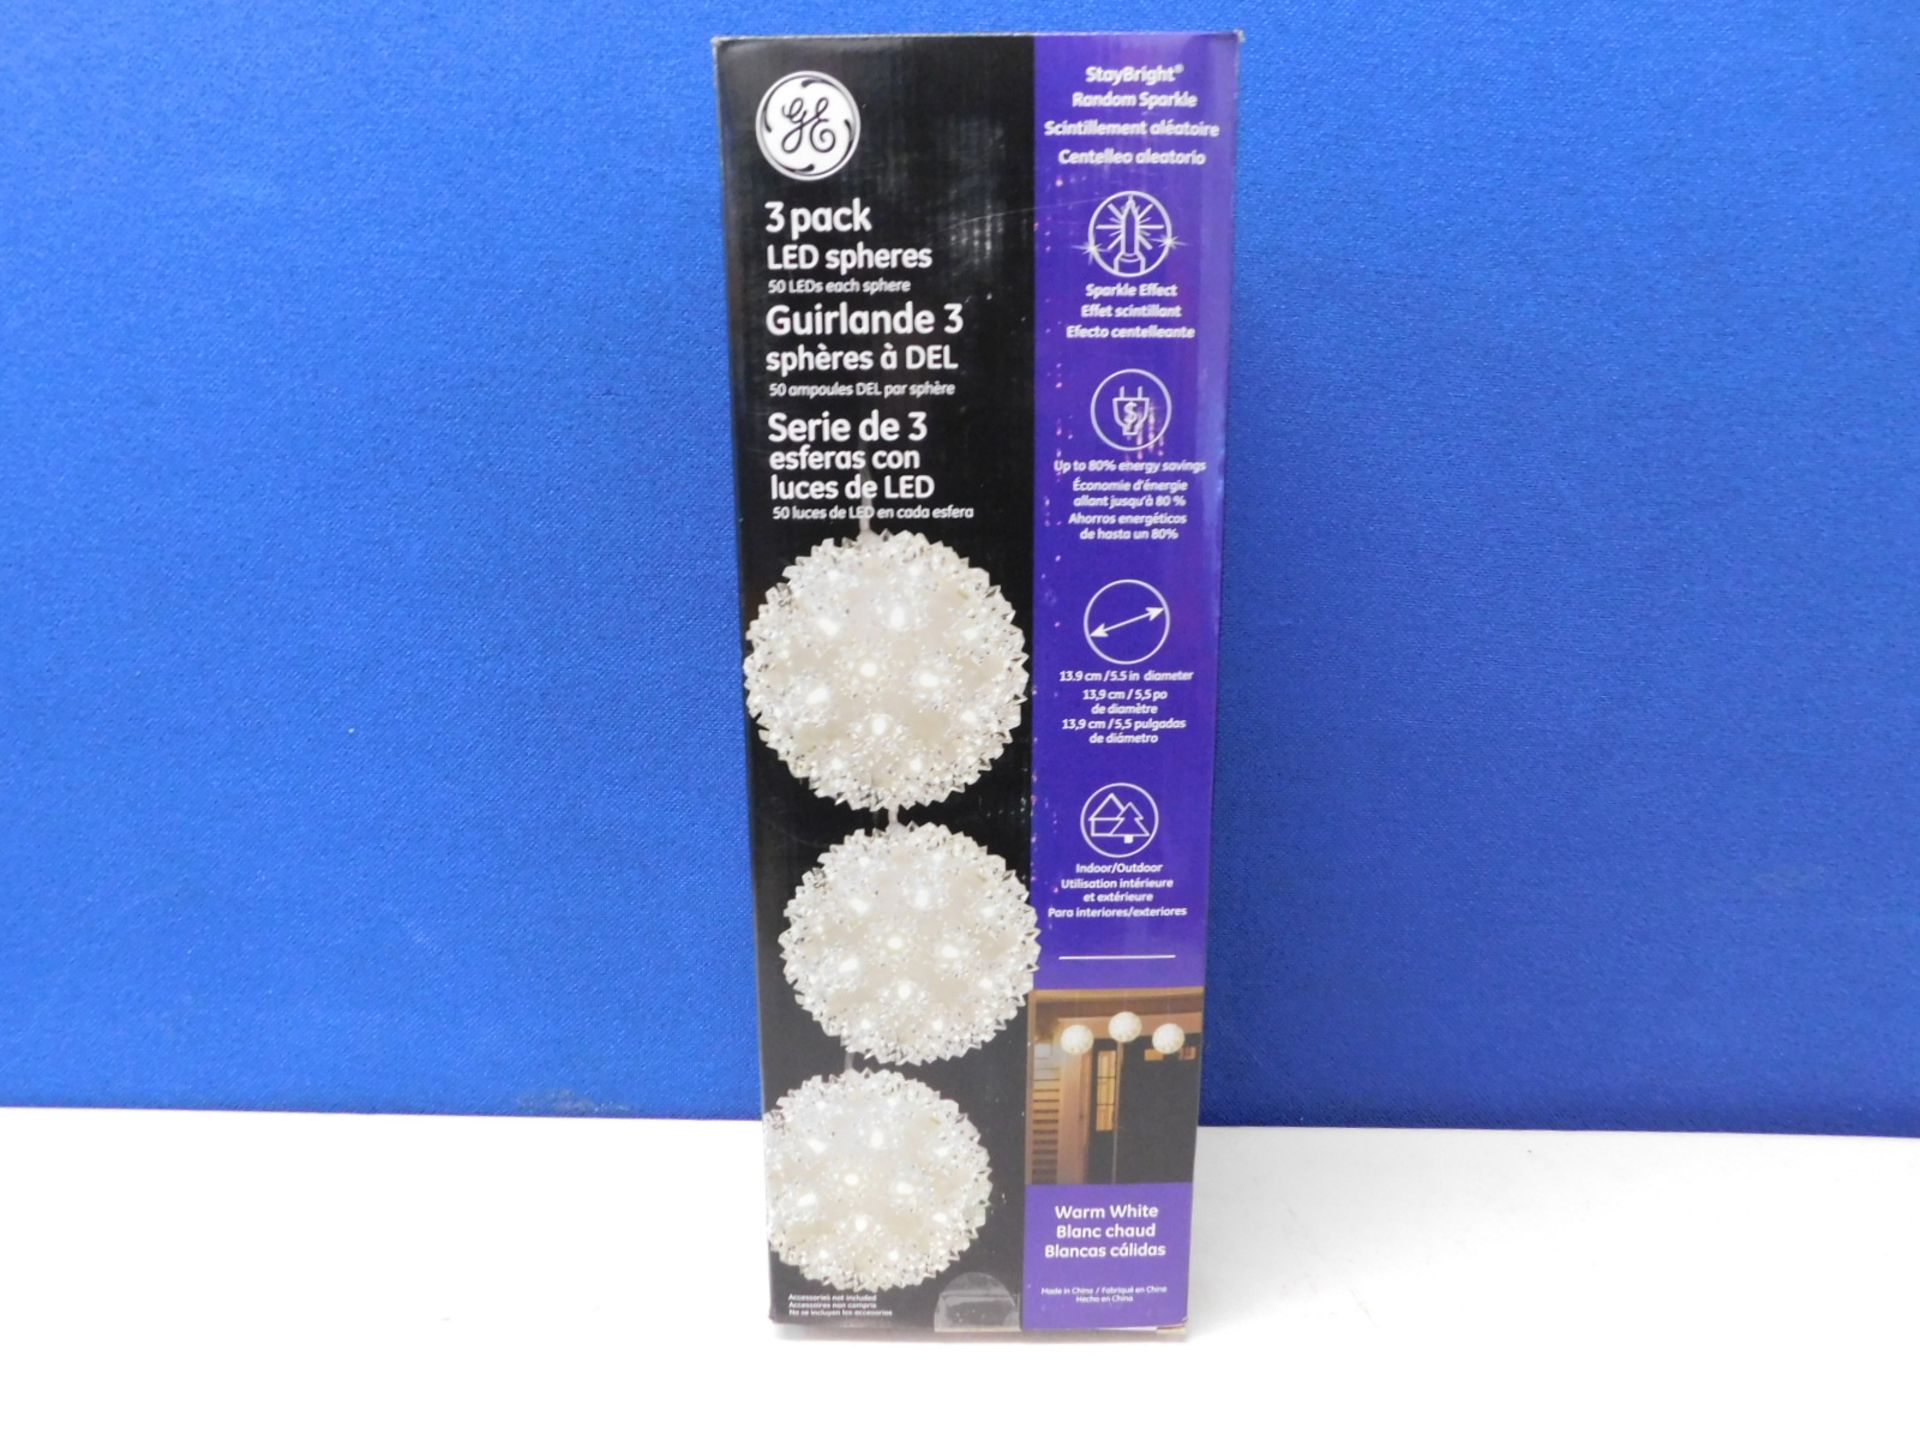 1 BOXED 3 PACK STAYBRIGHT SUPER BRIGHT LED SPHERES RRP £34.99